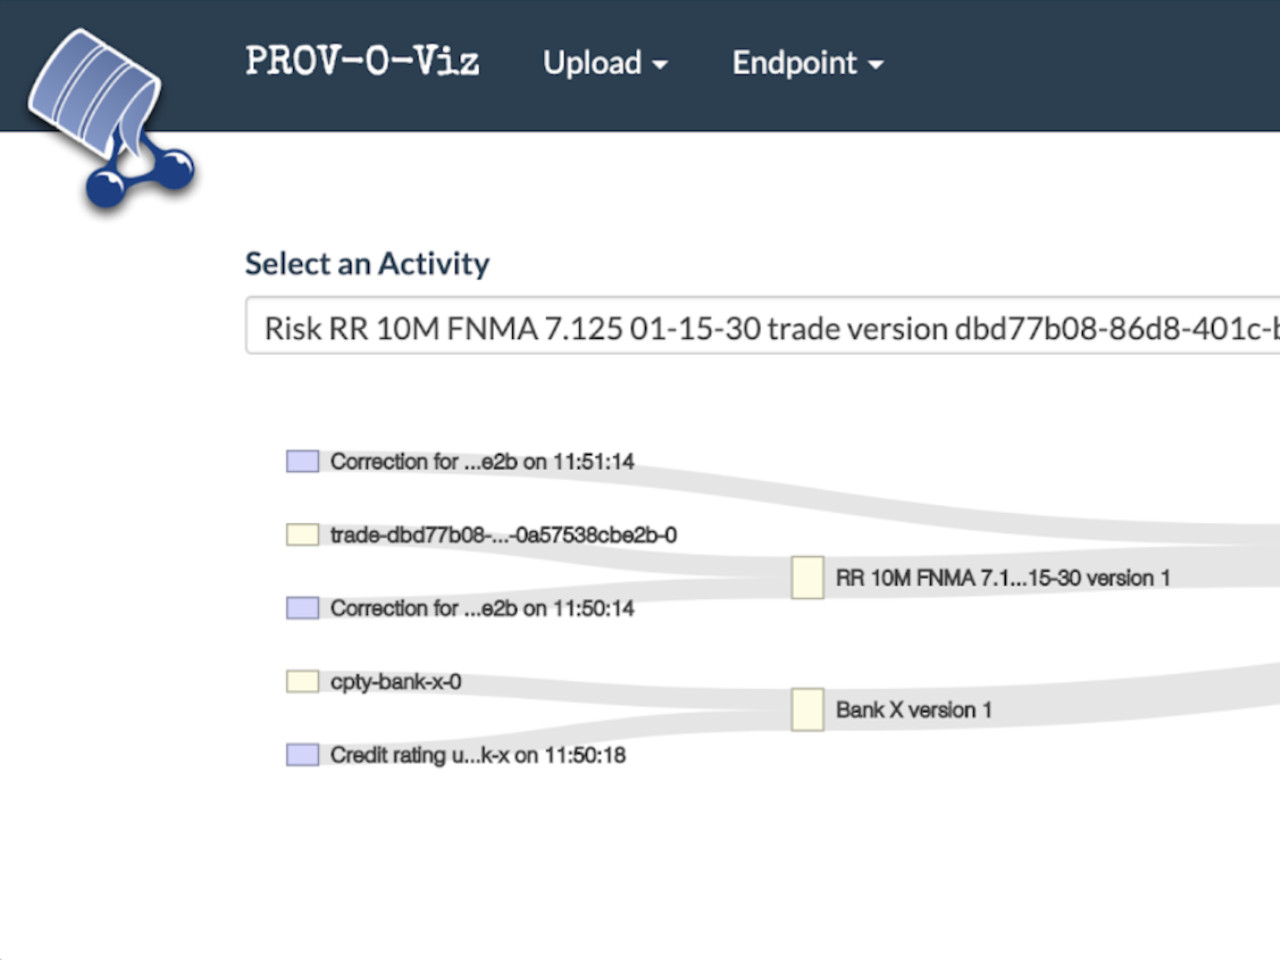 Screenshot from PROV-O Viz showing provenance of risk information about a repo trade.